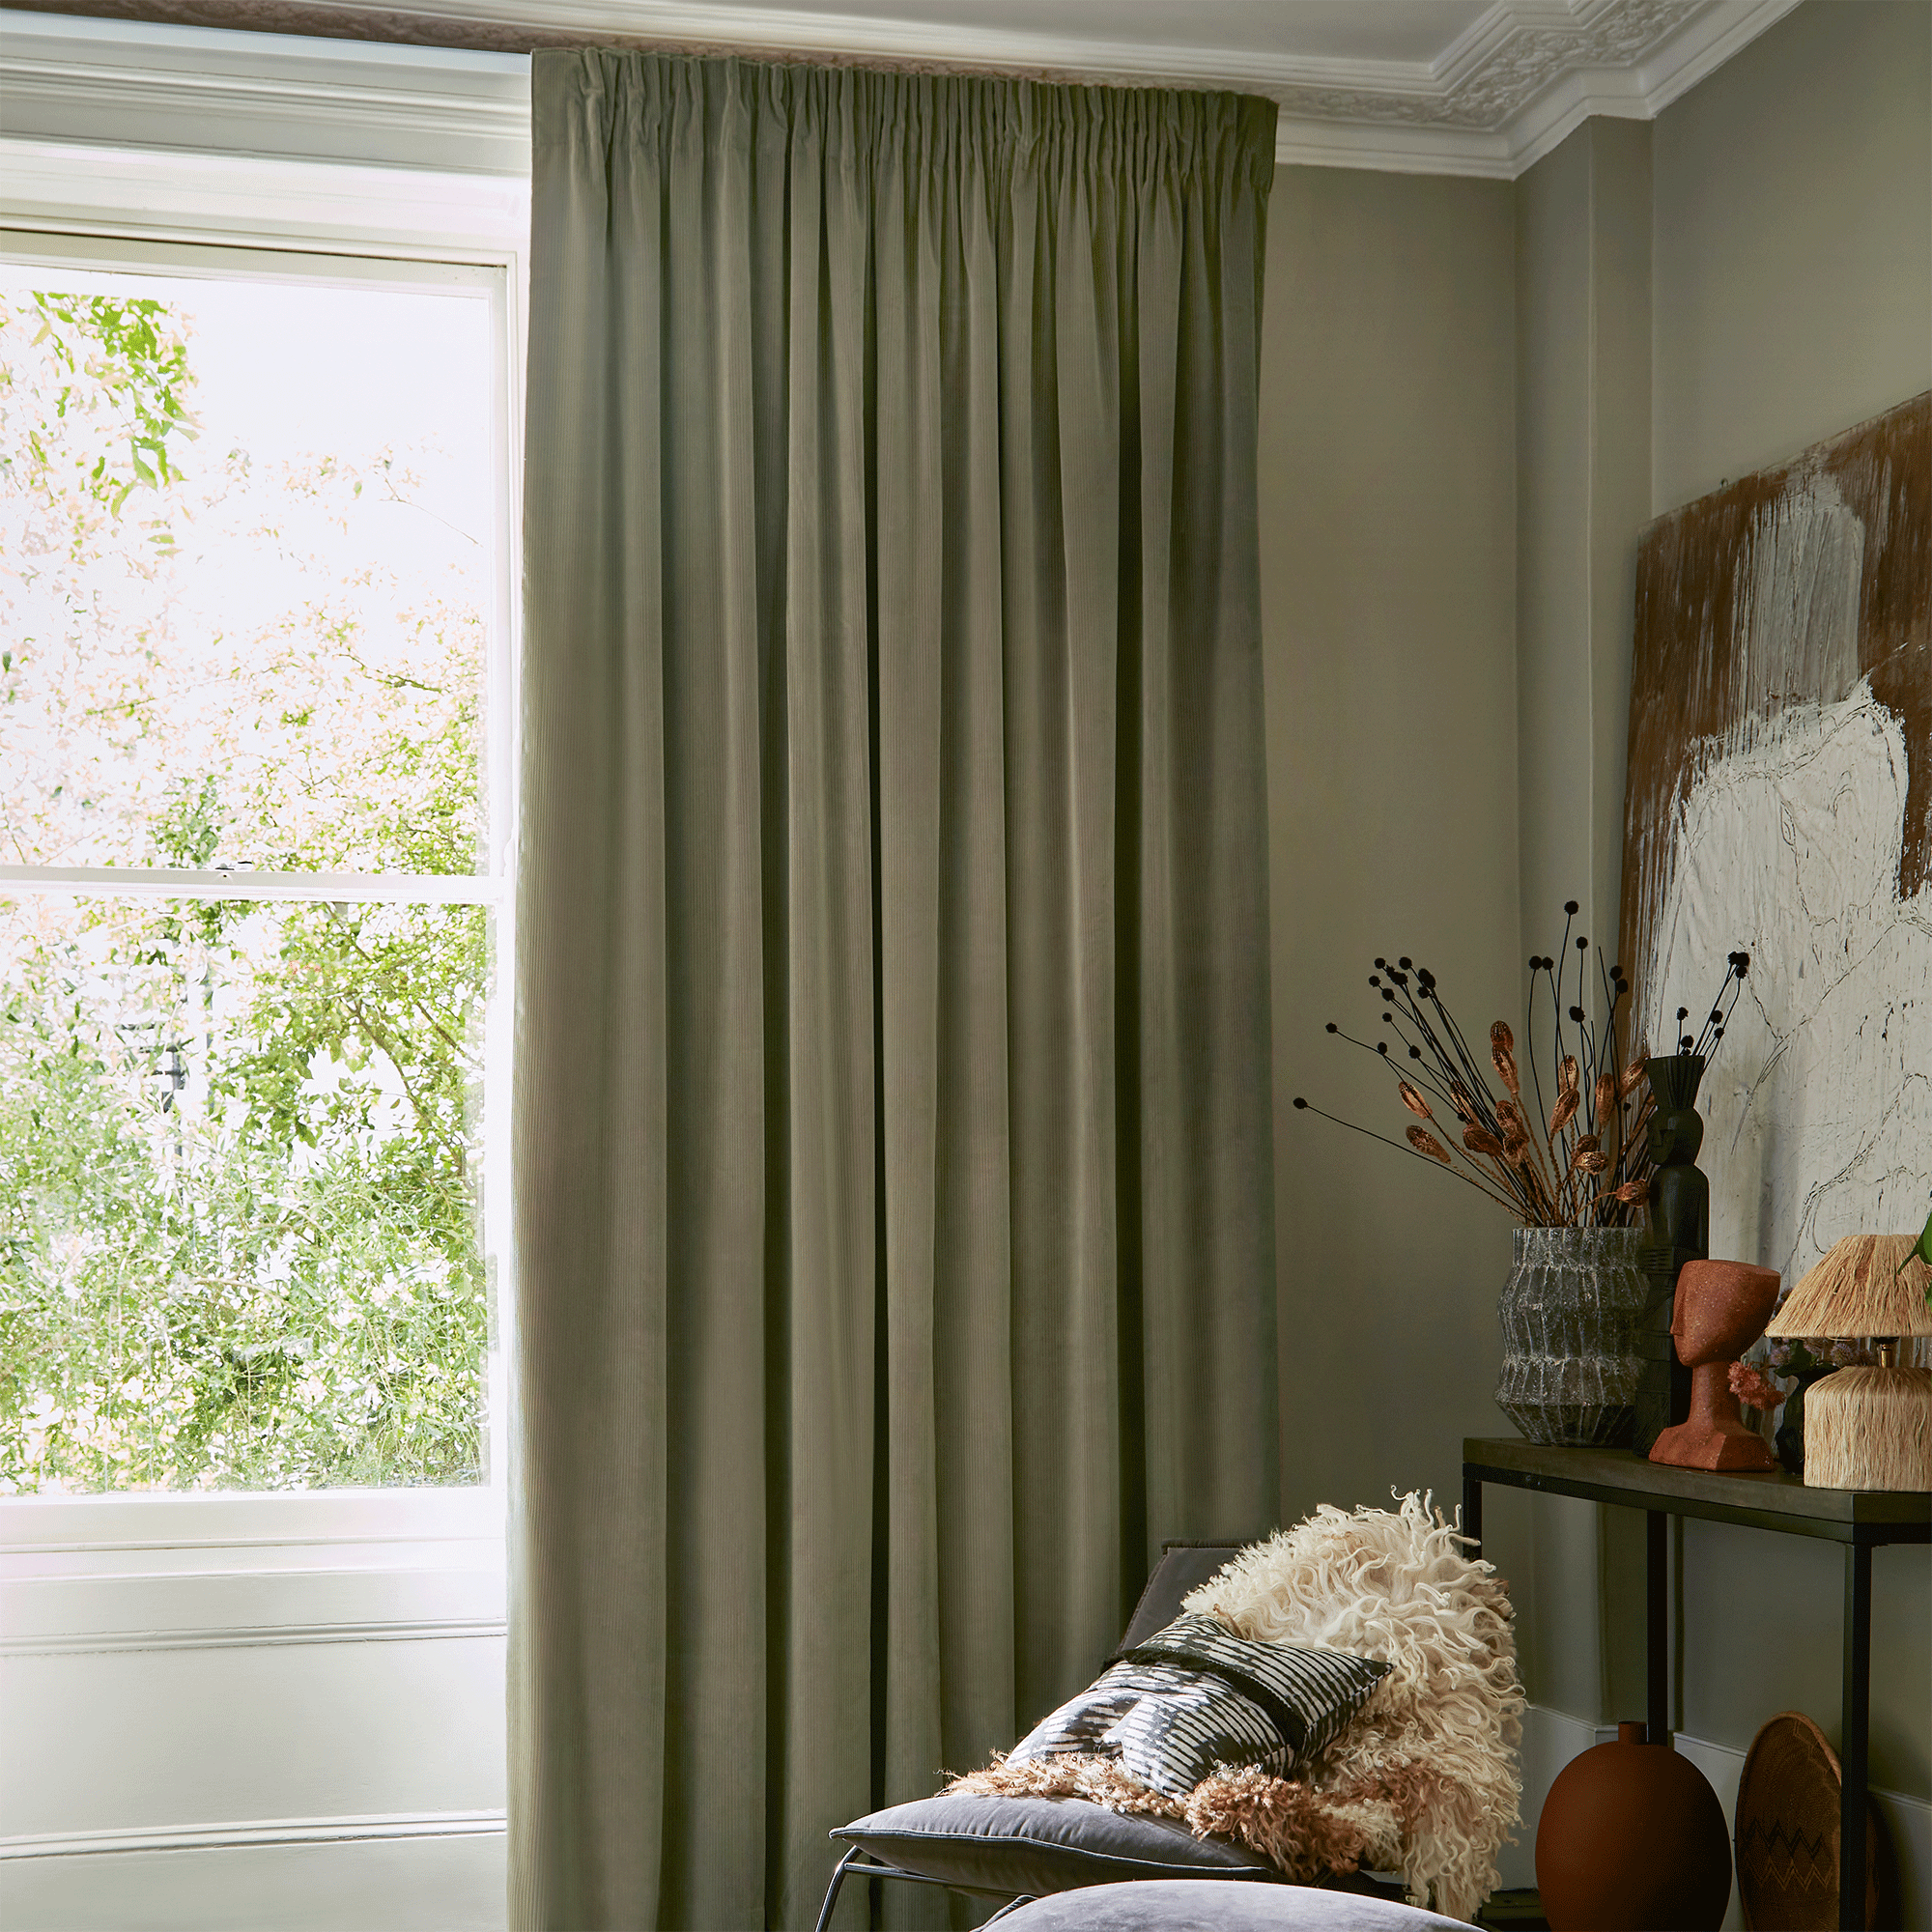 Green curtains in front of large window